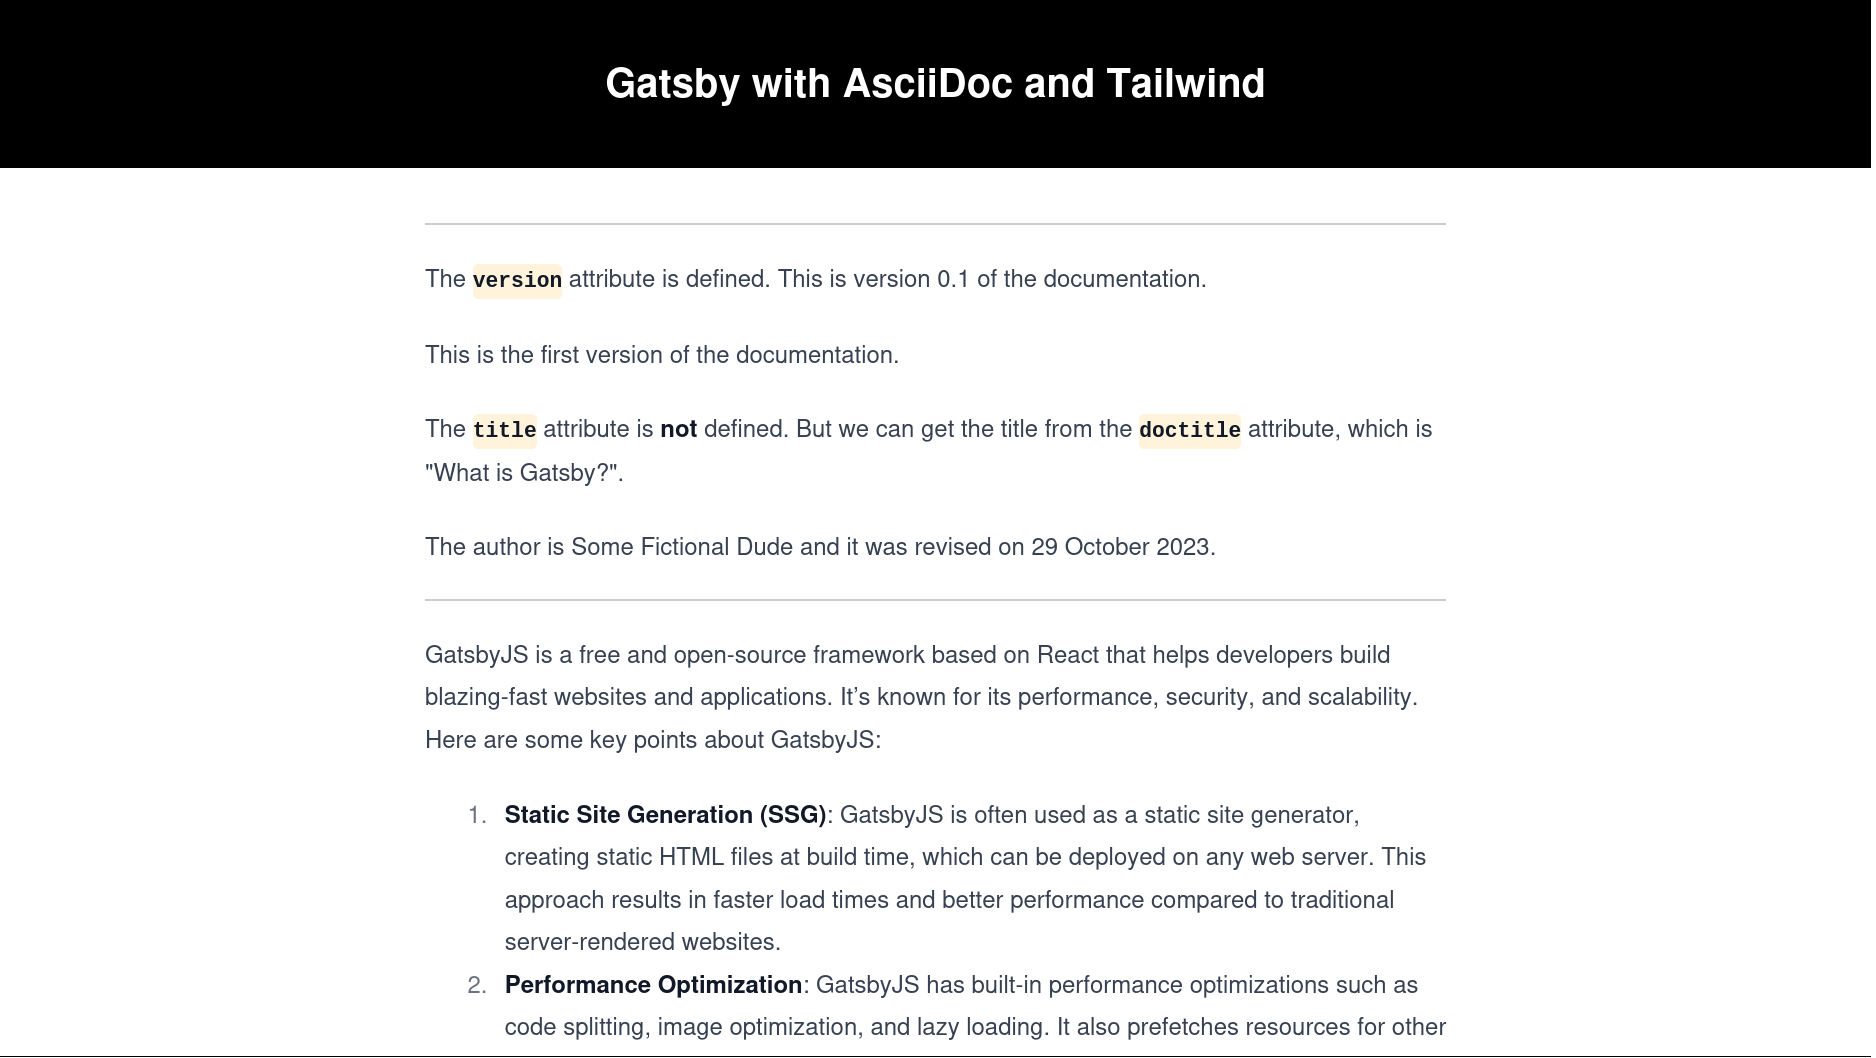 'What is Gatsby?' page for first version of the documentation.